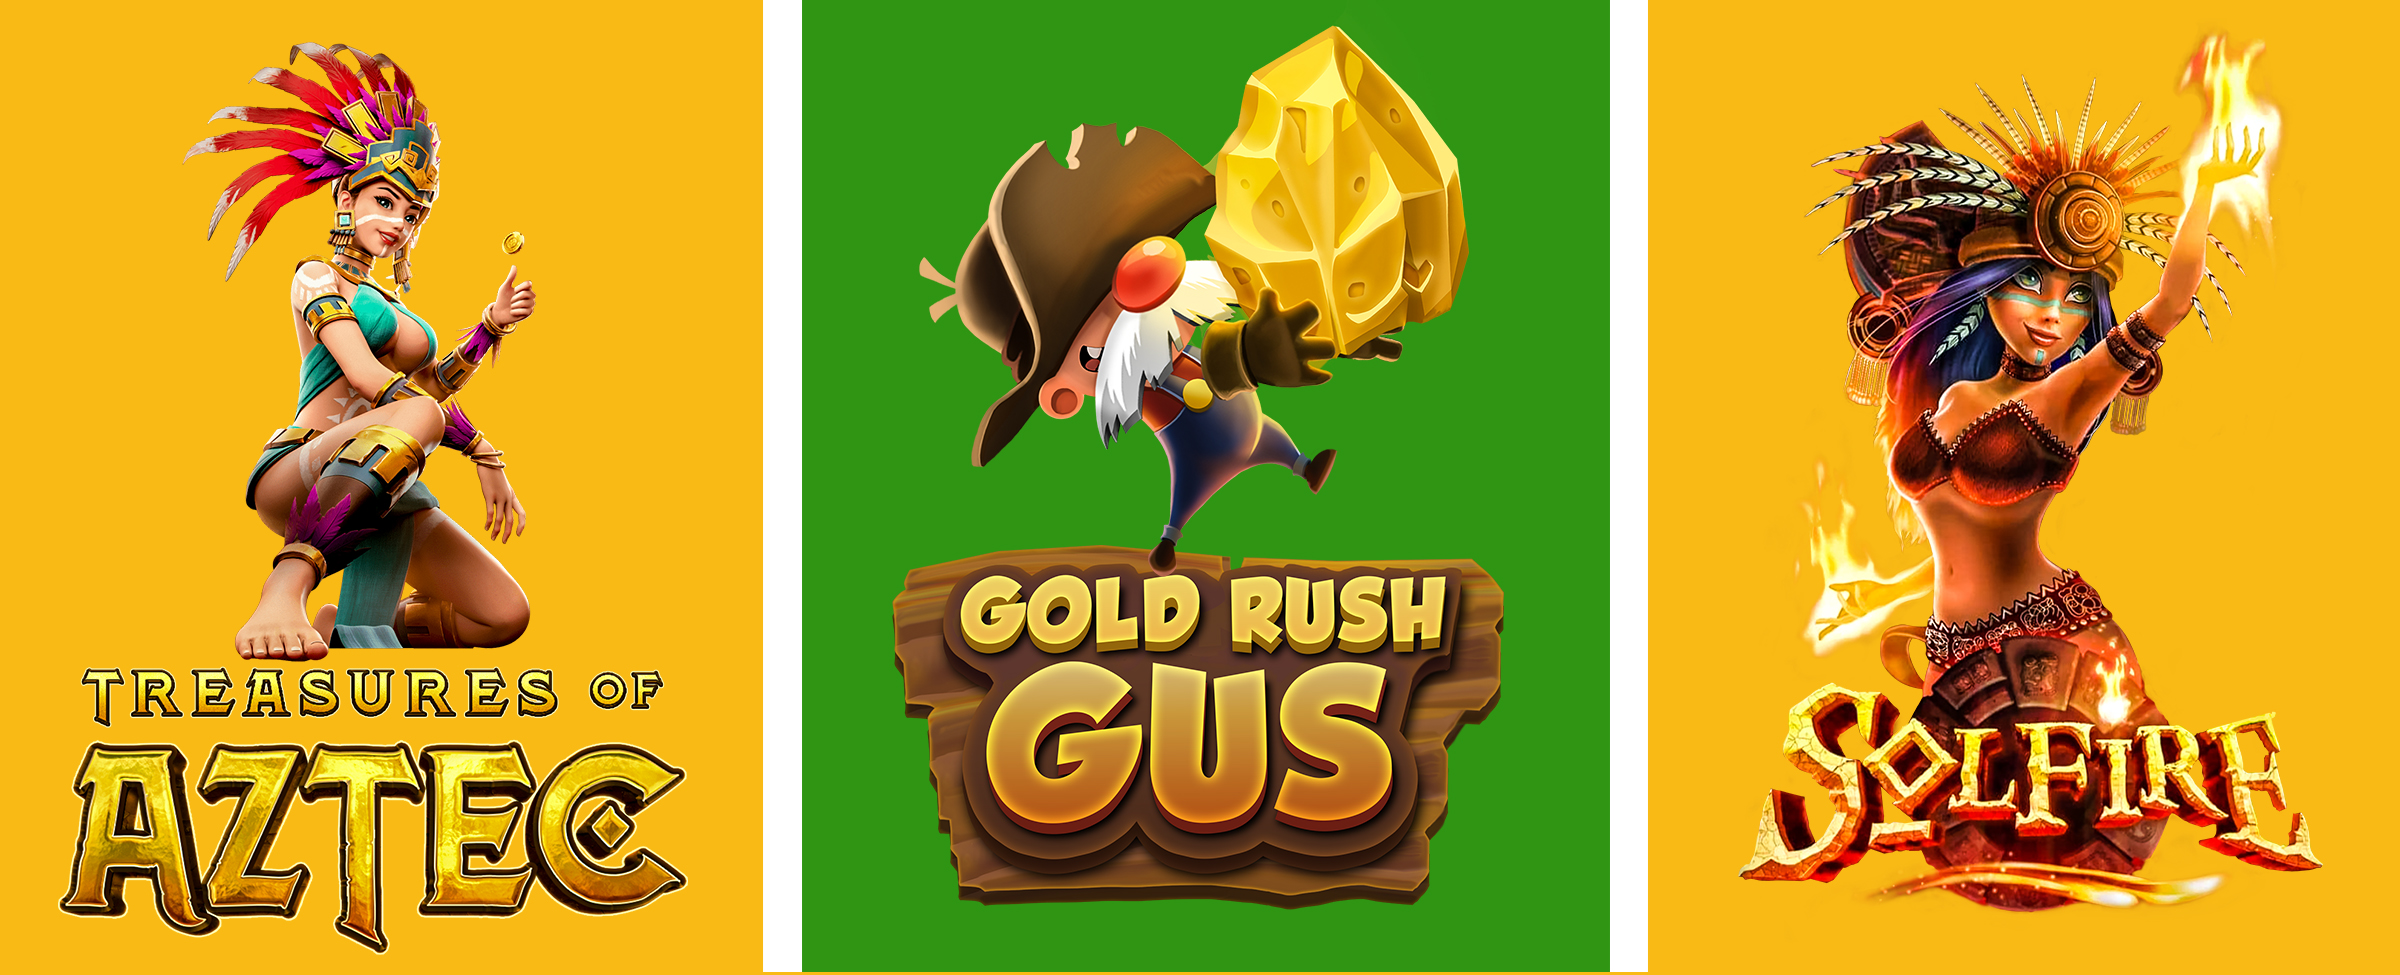 If you love Gold Rush Gus and the City of Riches, you’ll also love Solfire, Treasures of Aztec, and of course, the original Gold Rush Gus – everyone’s favourite.